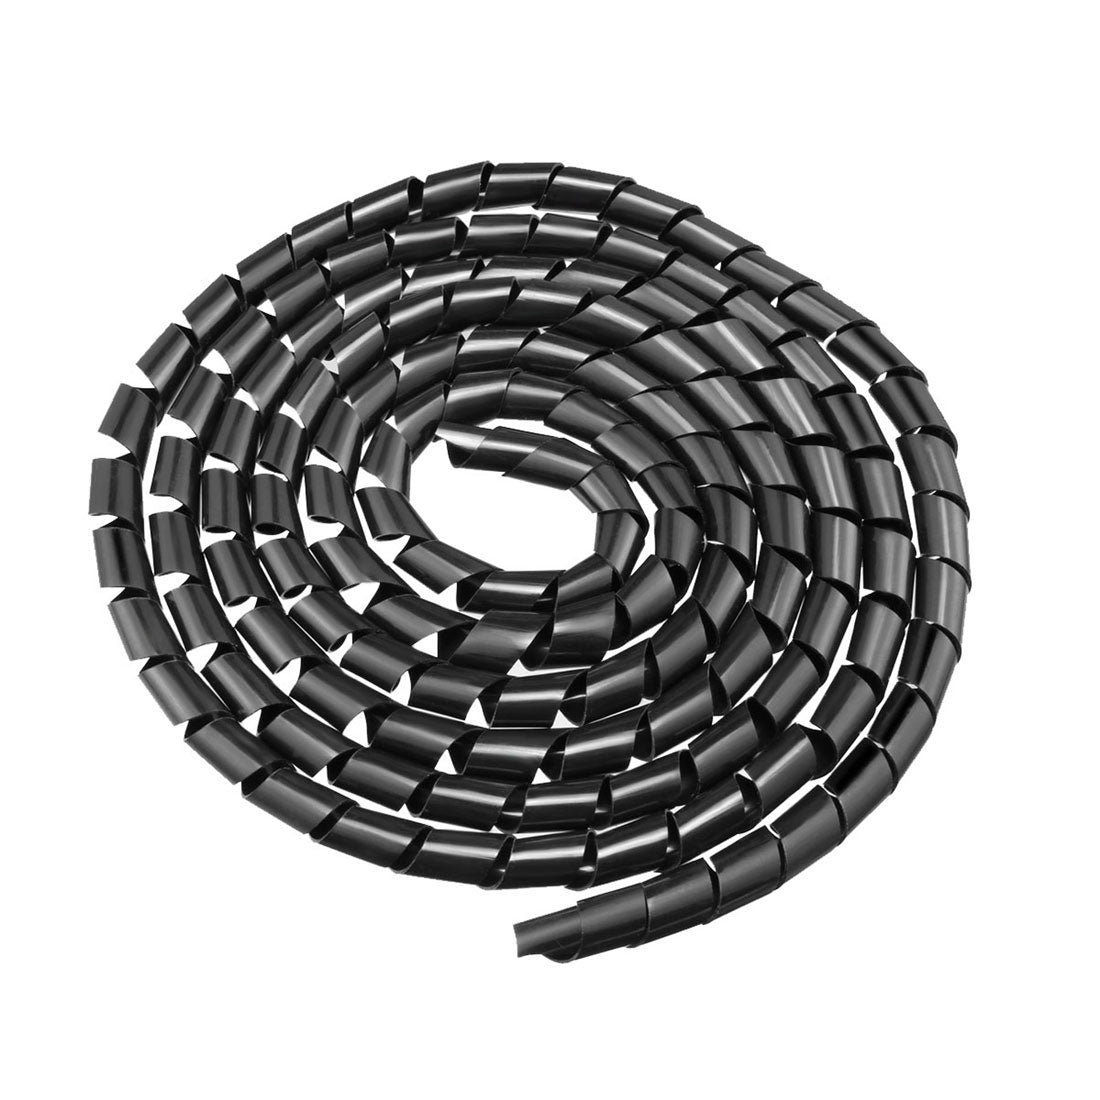 uxcell Uxcell 11mm Flexible Spiral Tube Cable Wire Wrap Computer Manage Cord 6.5M Length Black